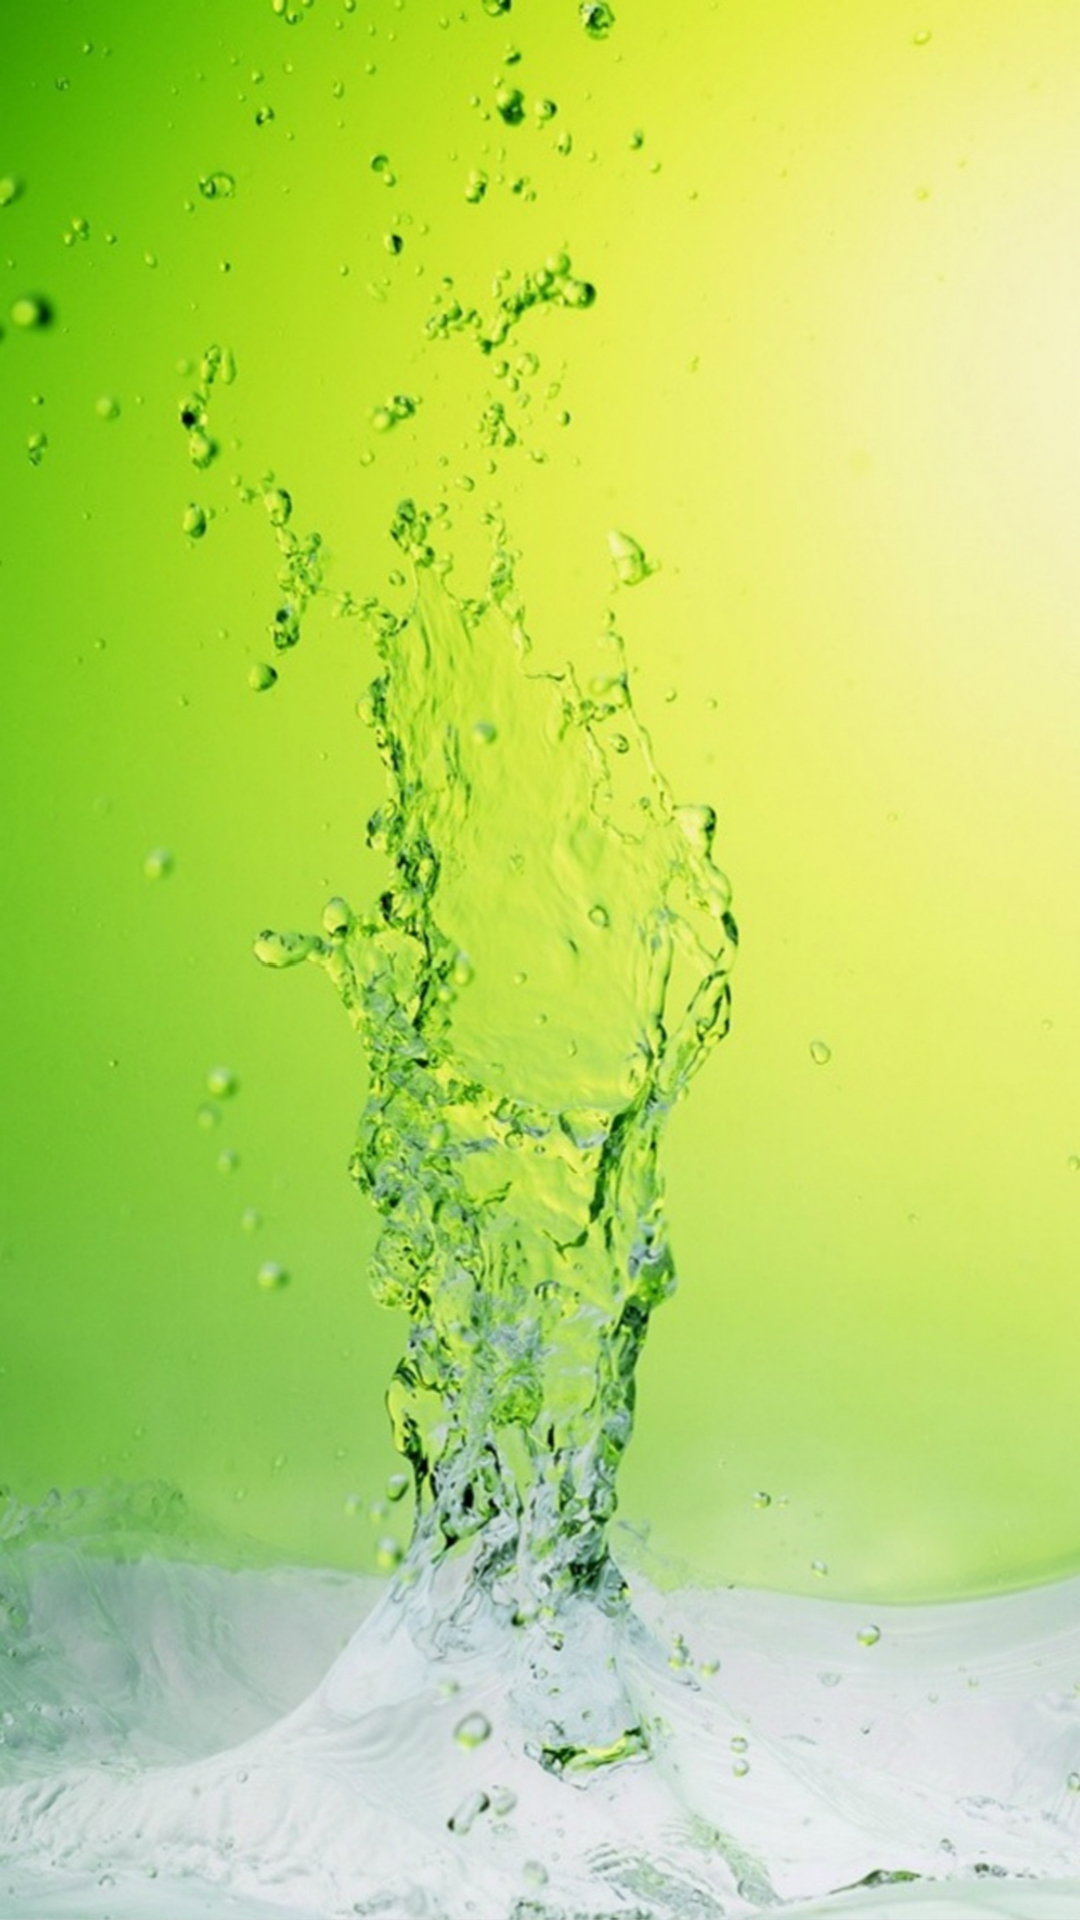 Abstract Crystal Icy Water Splash Green Background iPhone 6